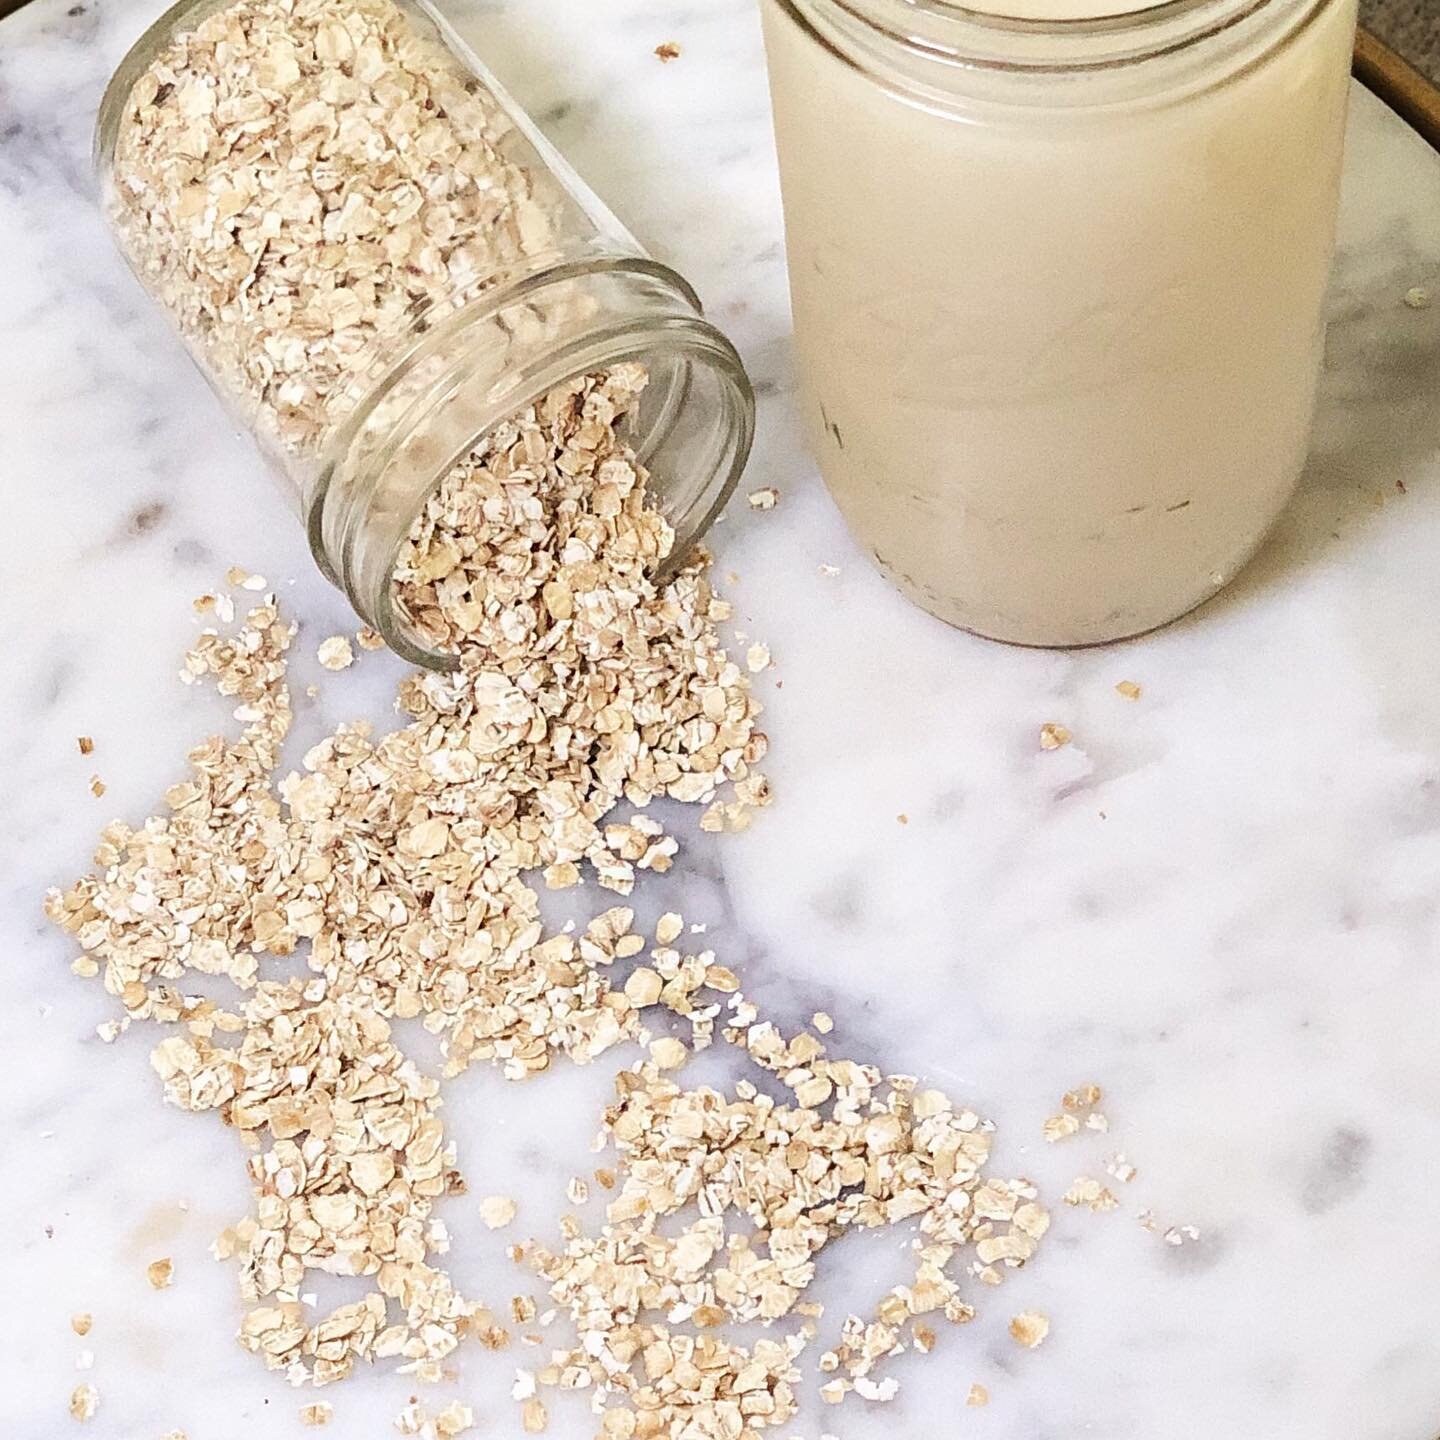 Oat Milk 💛
It&rsquo;s amazingly easy, and incredibly cost-effect to make. I personally used my favorite kitchen appliance @almondcow - however I have made it with the below steps many times! 

Ingredients:
&bull; ⅔ cup dry whole grain oats
&bull; 3 